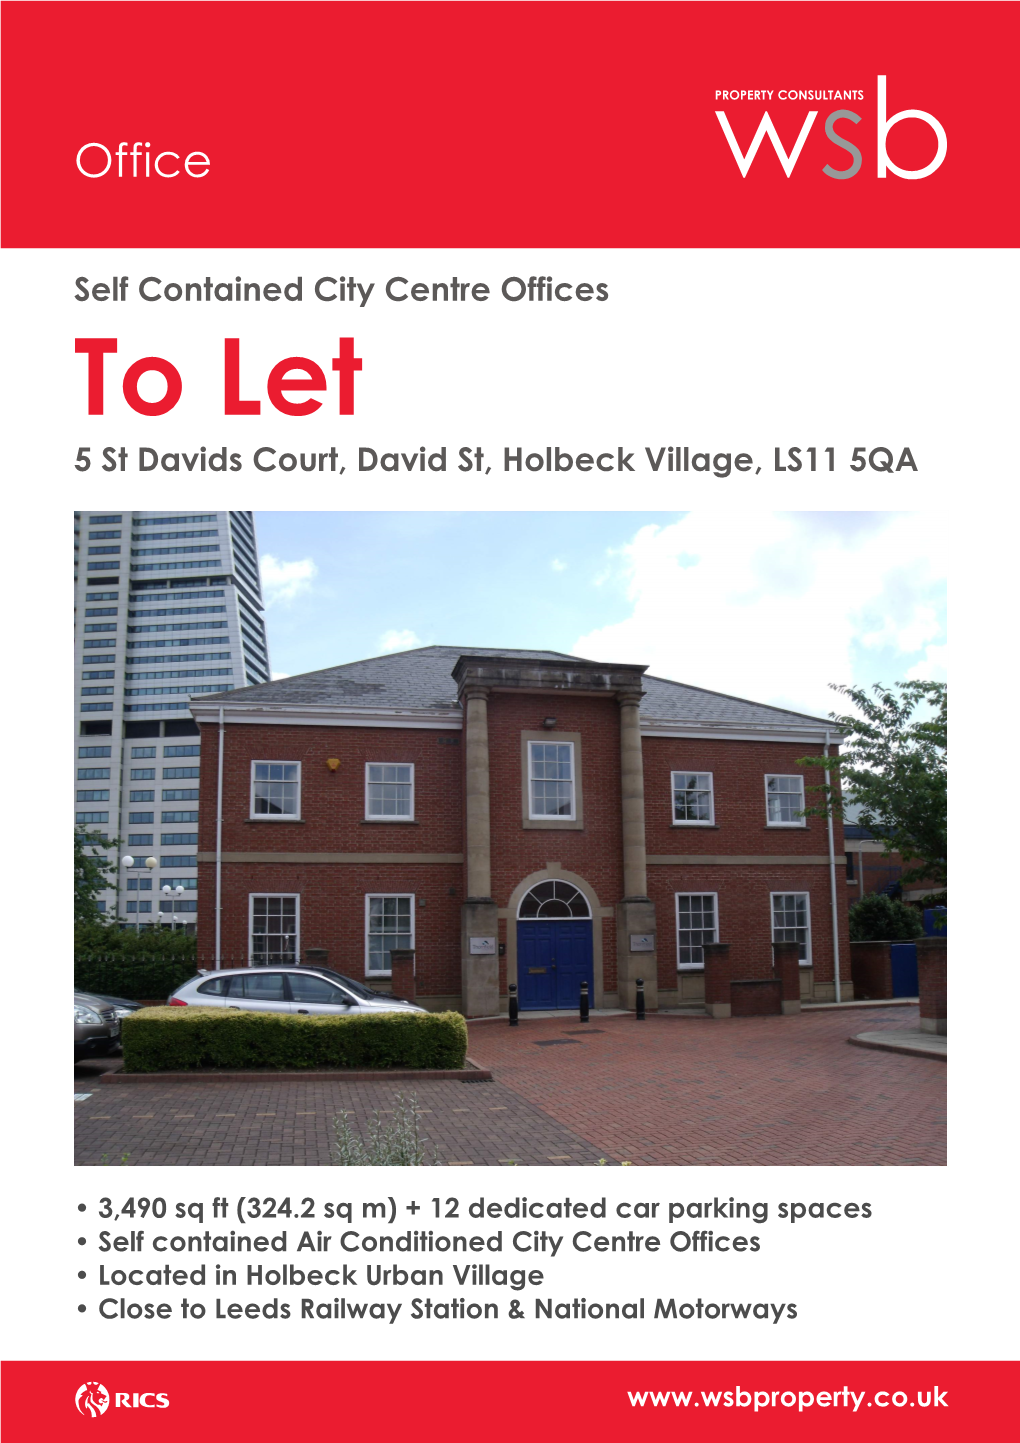 Self Contained City Centre Offices to Let 5 St Davids Court, David St, Holbeck Village, LS11 5QA